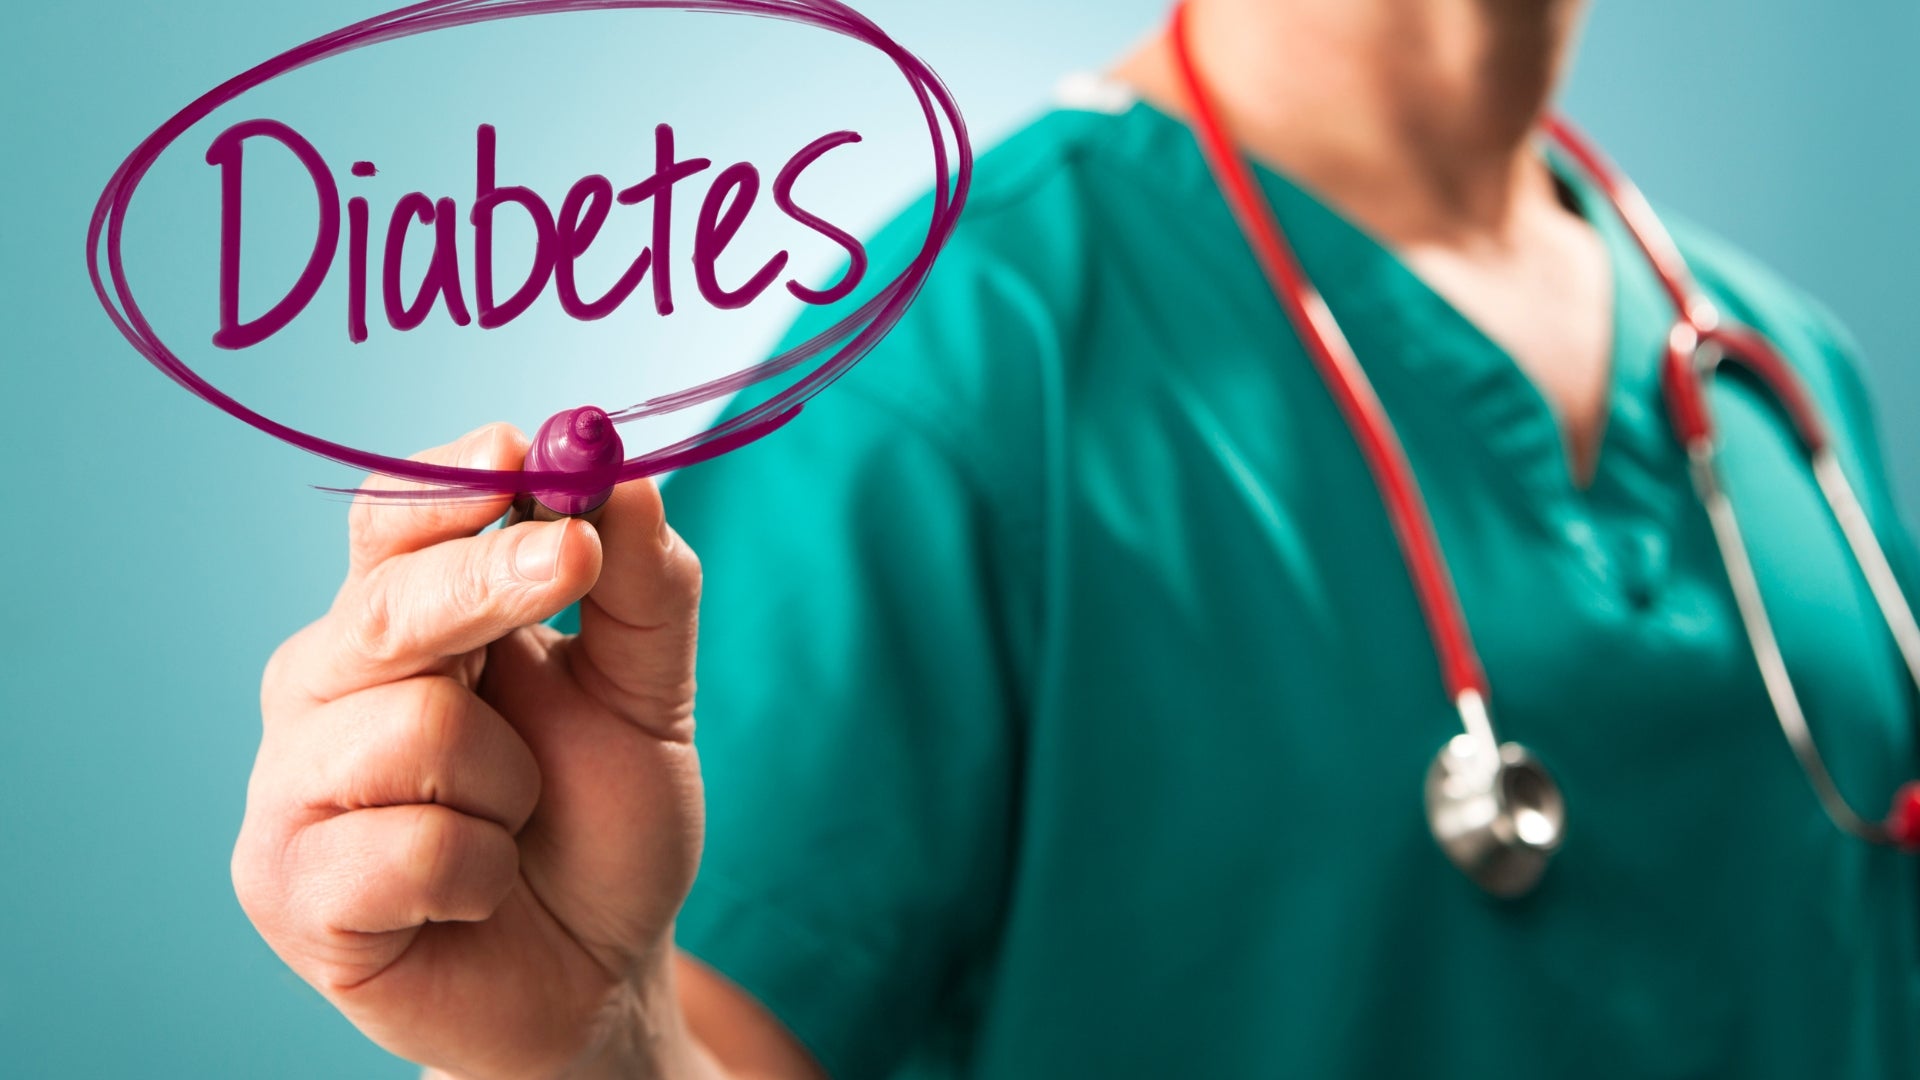 Why is blood sugar control important?